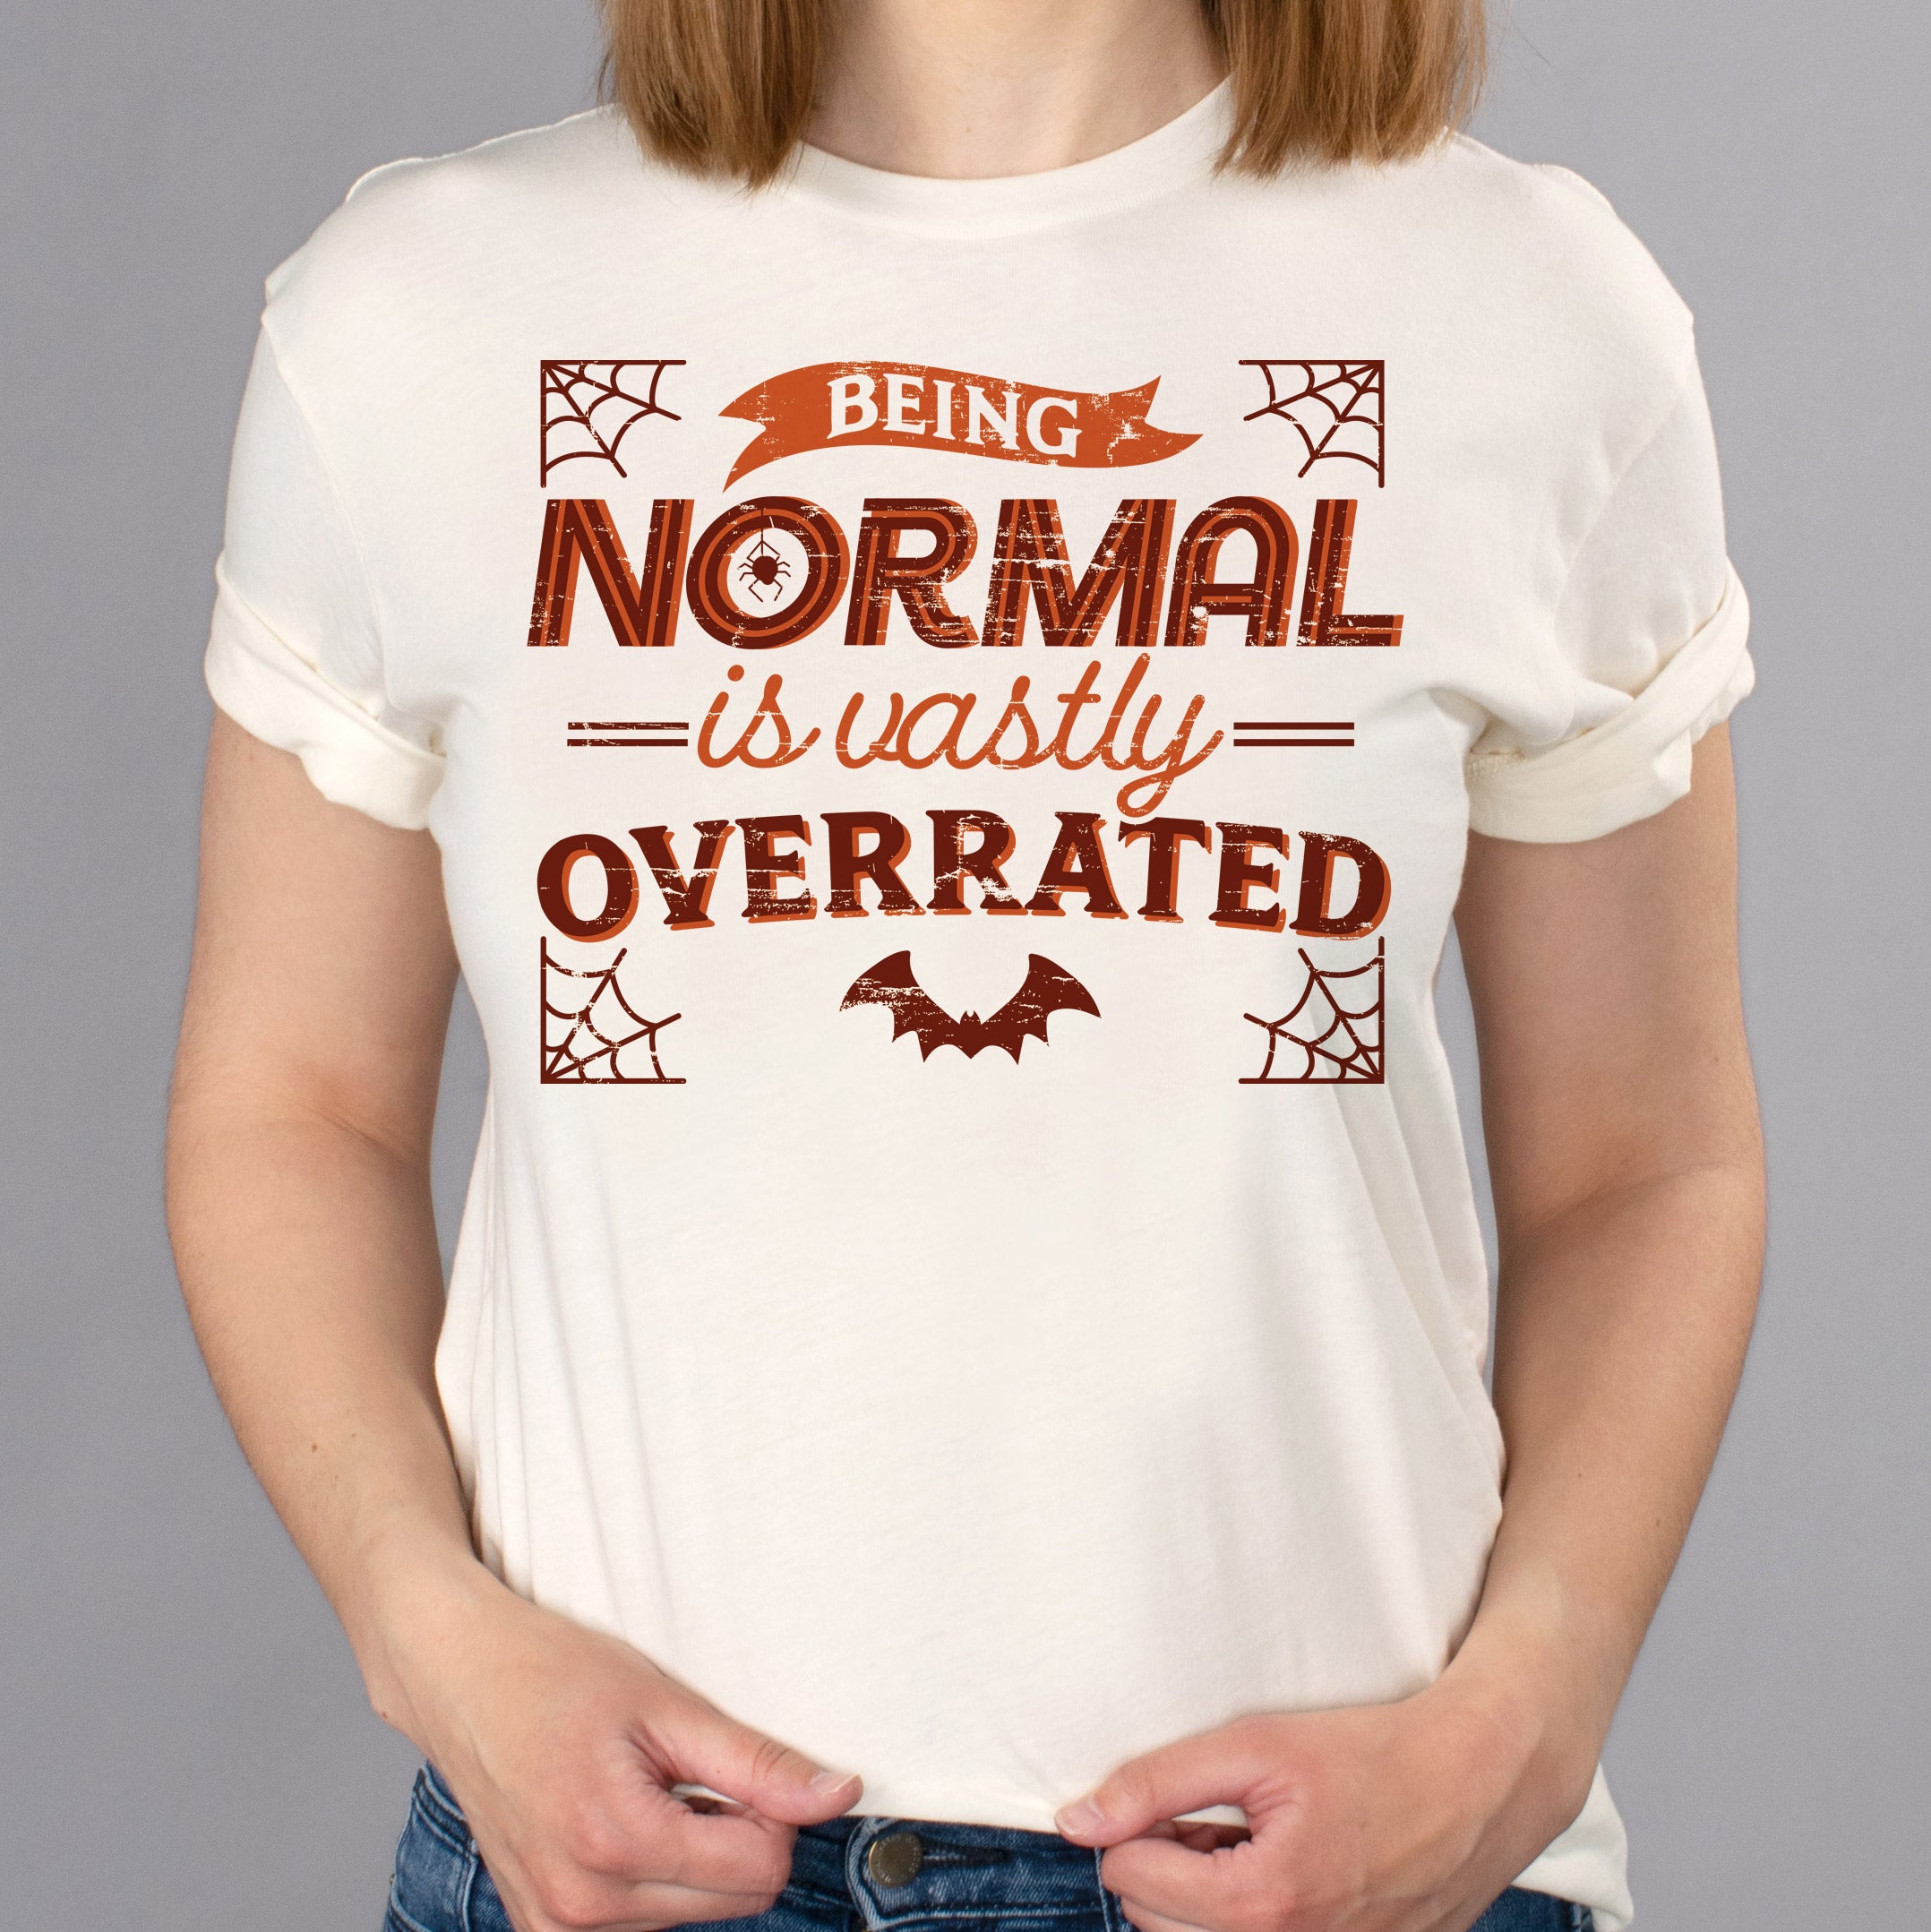 normal is overrated